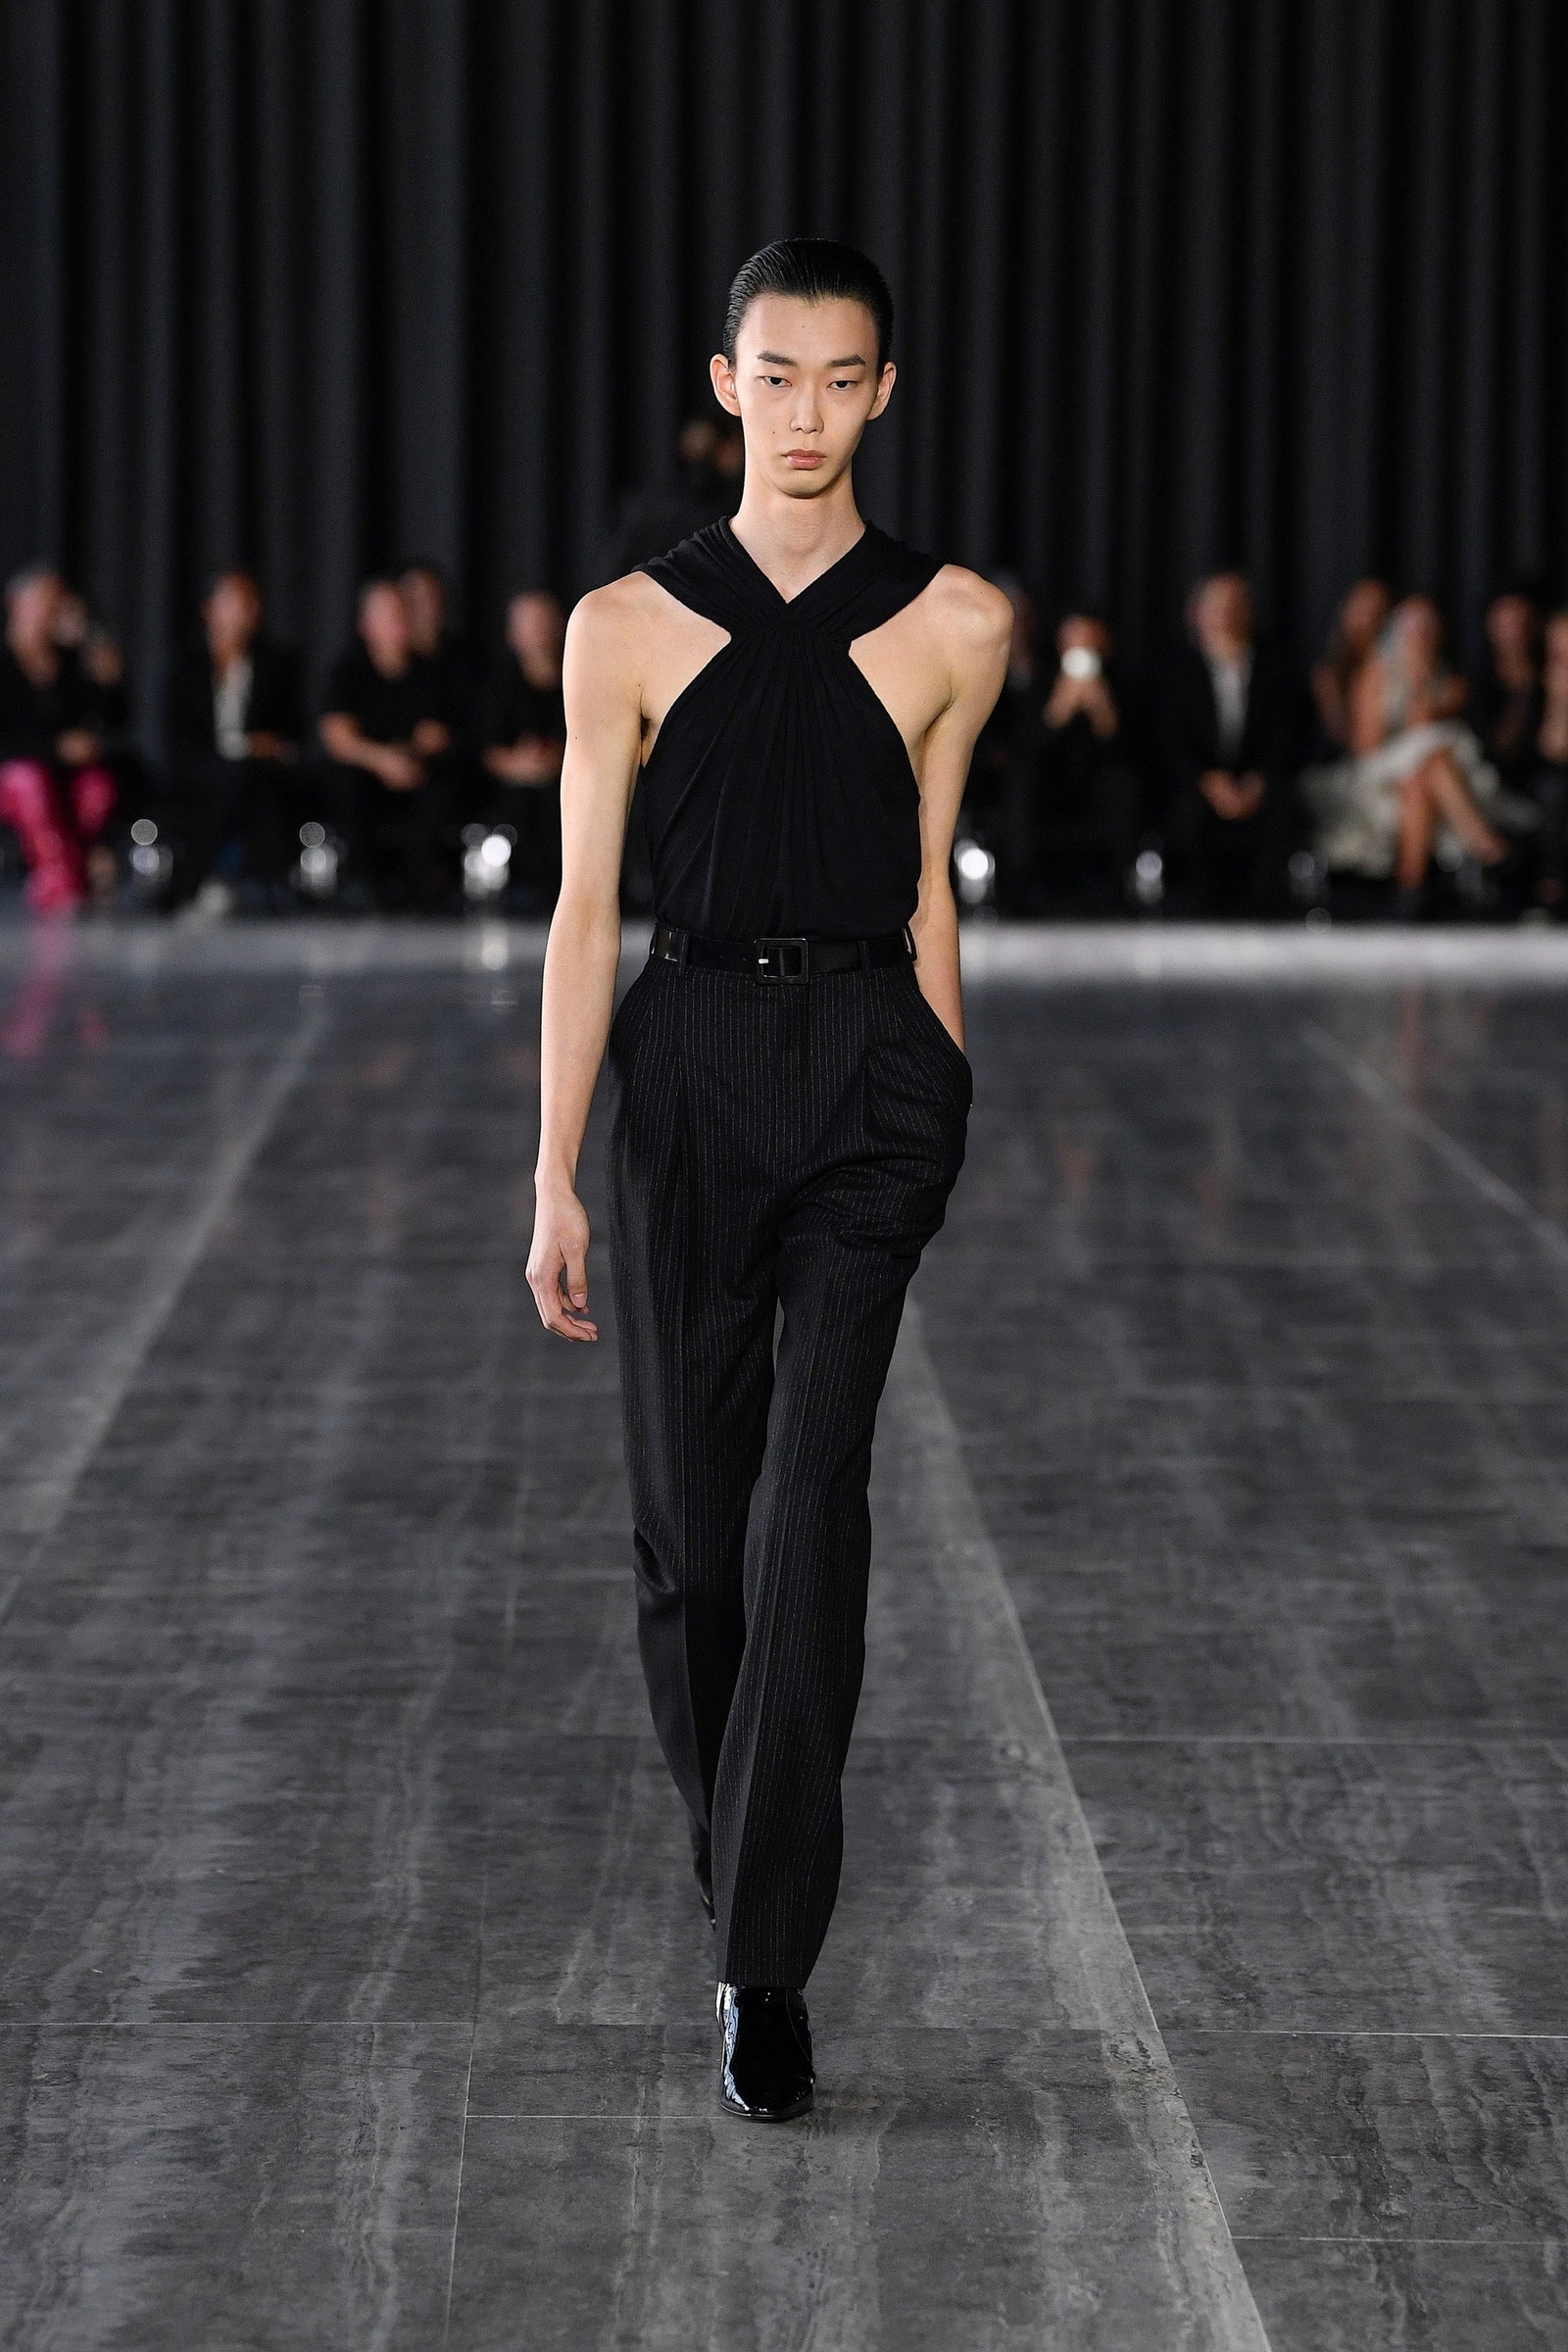 Saint Laurent by Anthony Vaccarello.